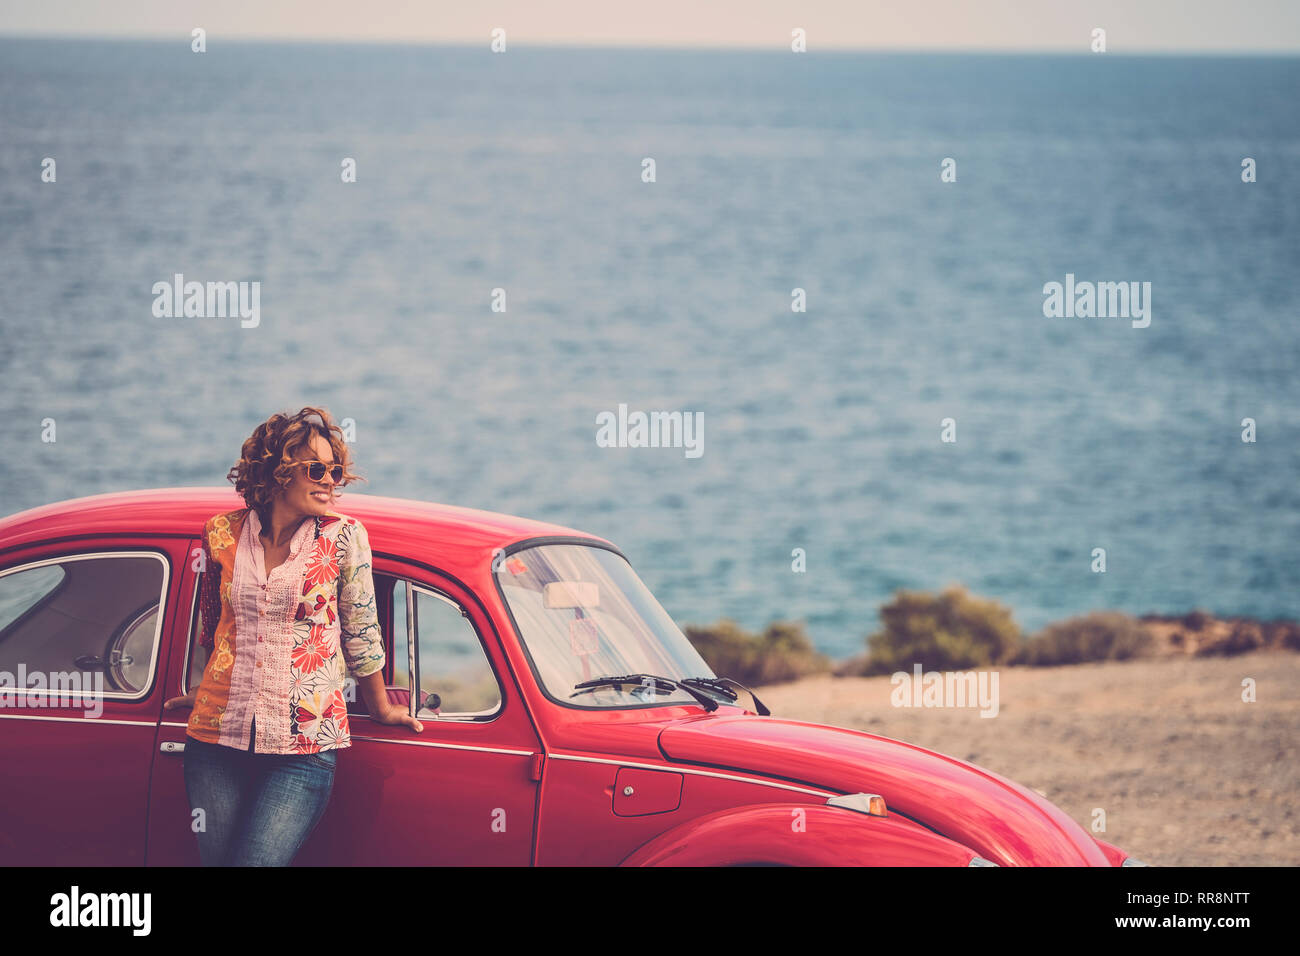 1,483 Man Poses His Car Images, Stock Photos & Vectors | Shutterstock